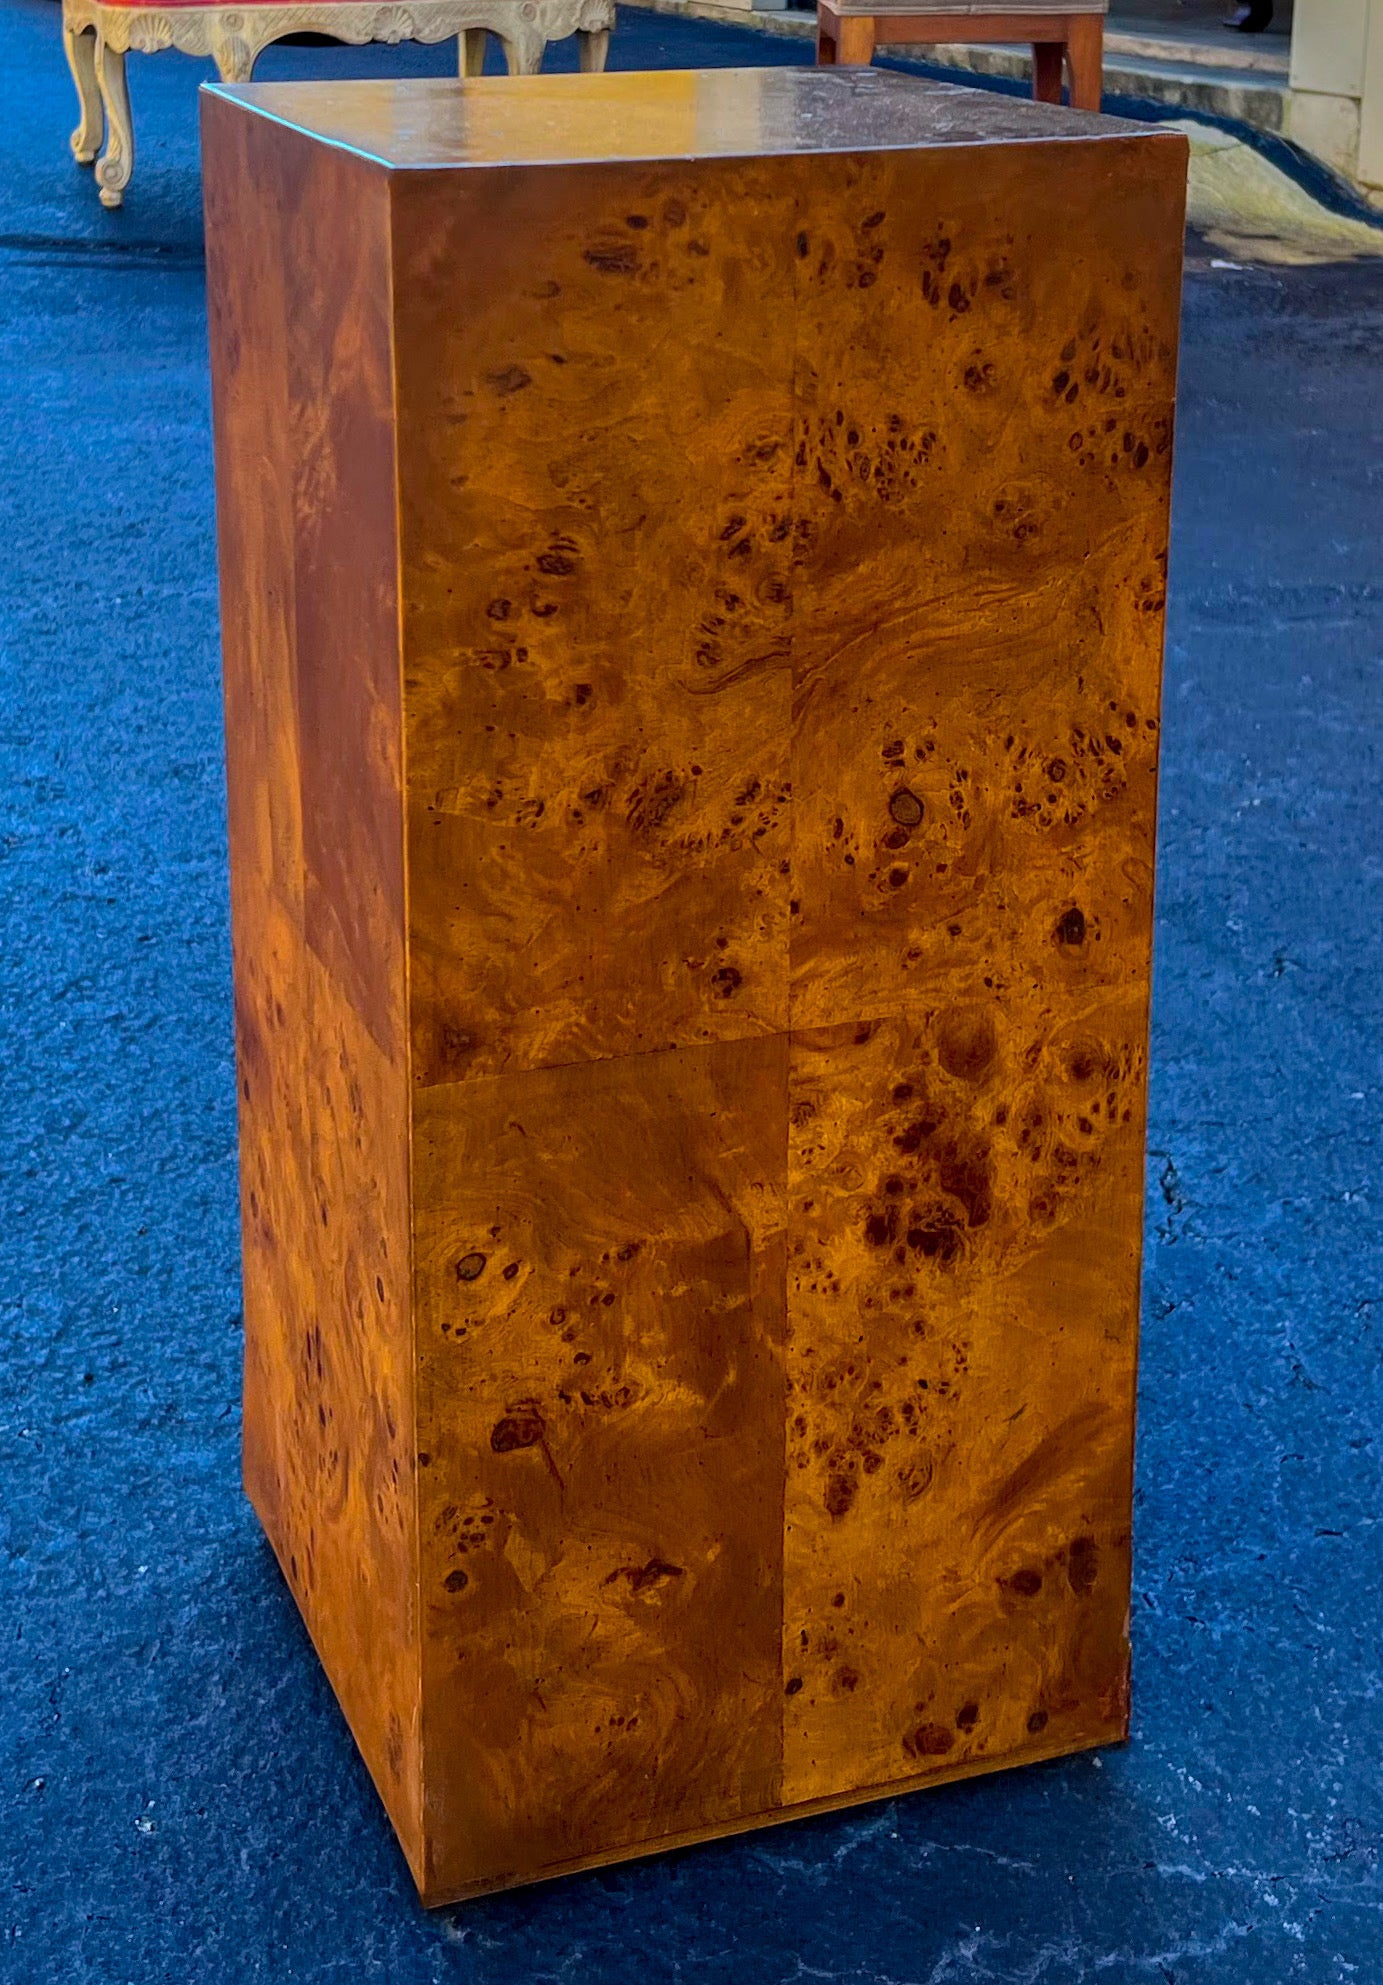 This is a 1970s Milo Baughman style burl wood pedestal in very good condition. It is unmarked. Perfect for displaying statuary or even as a side table.